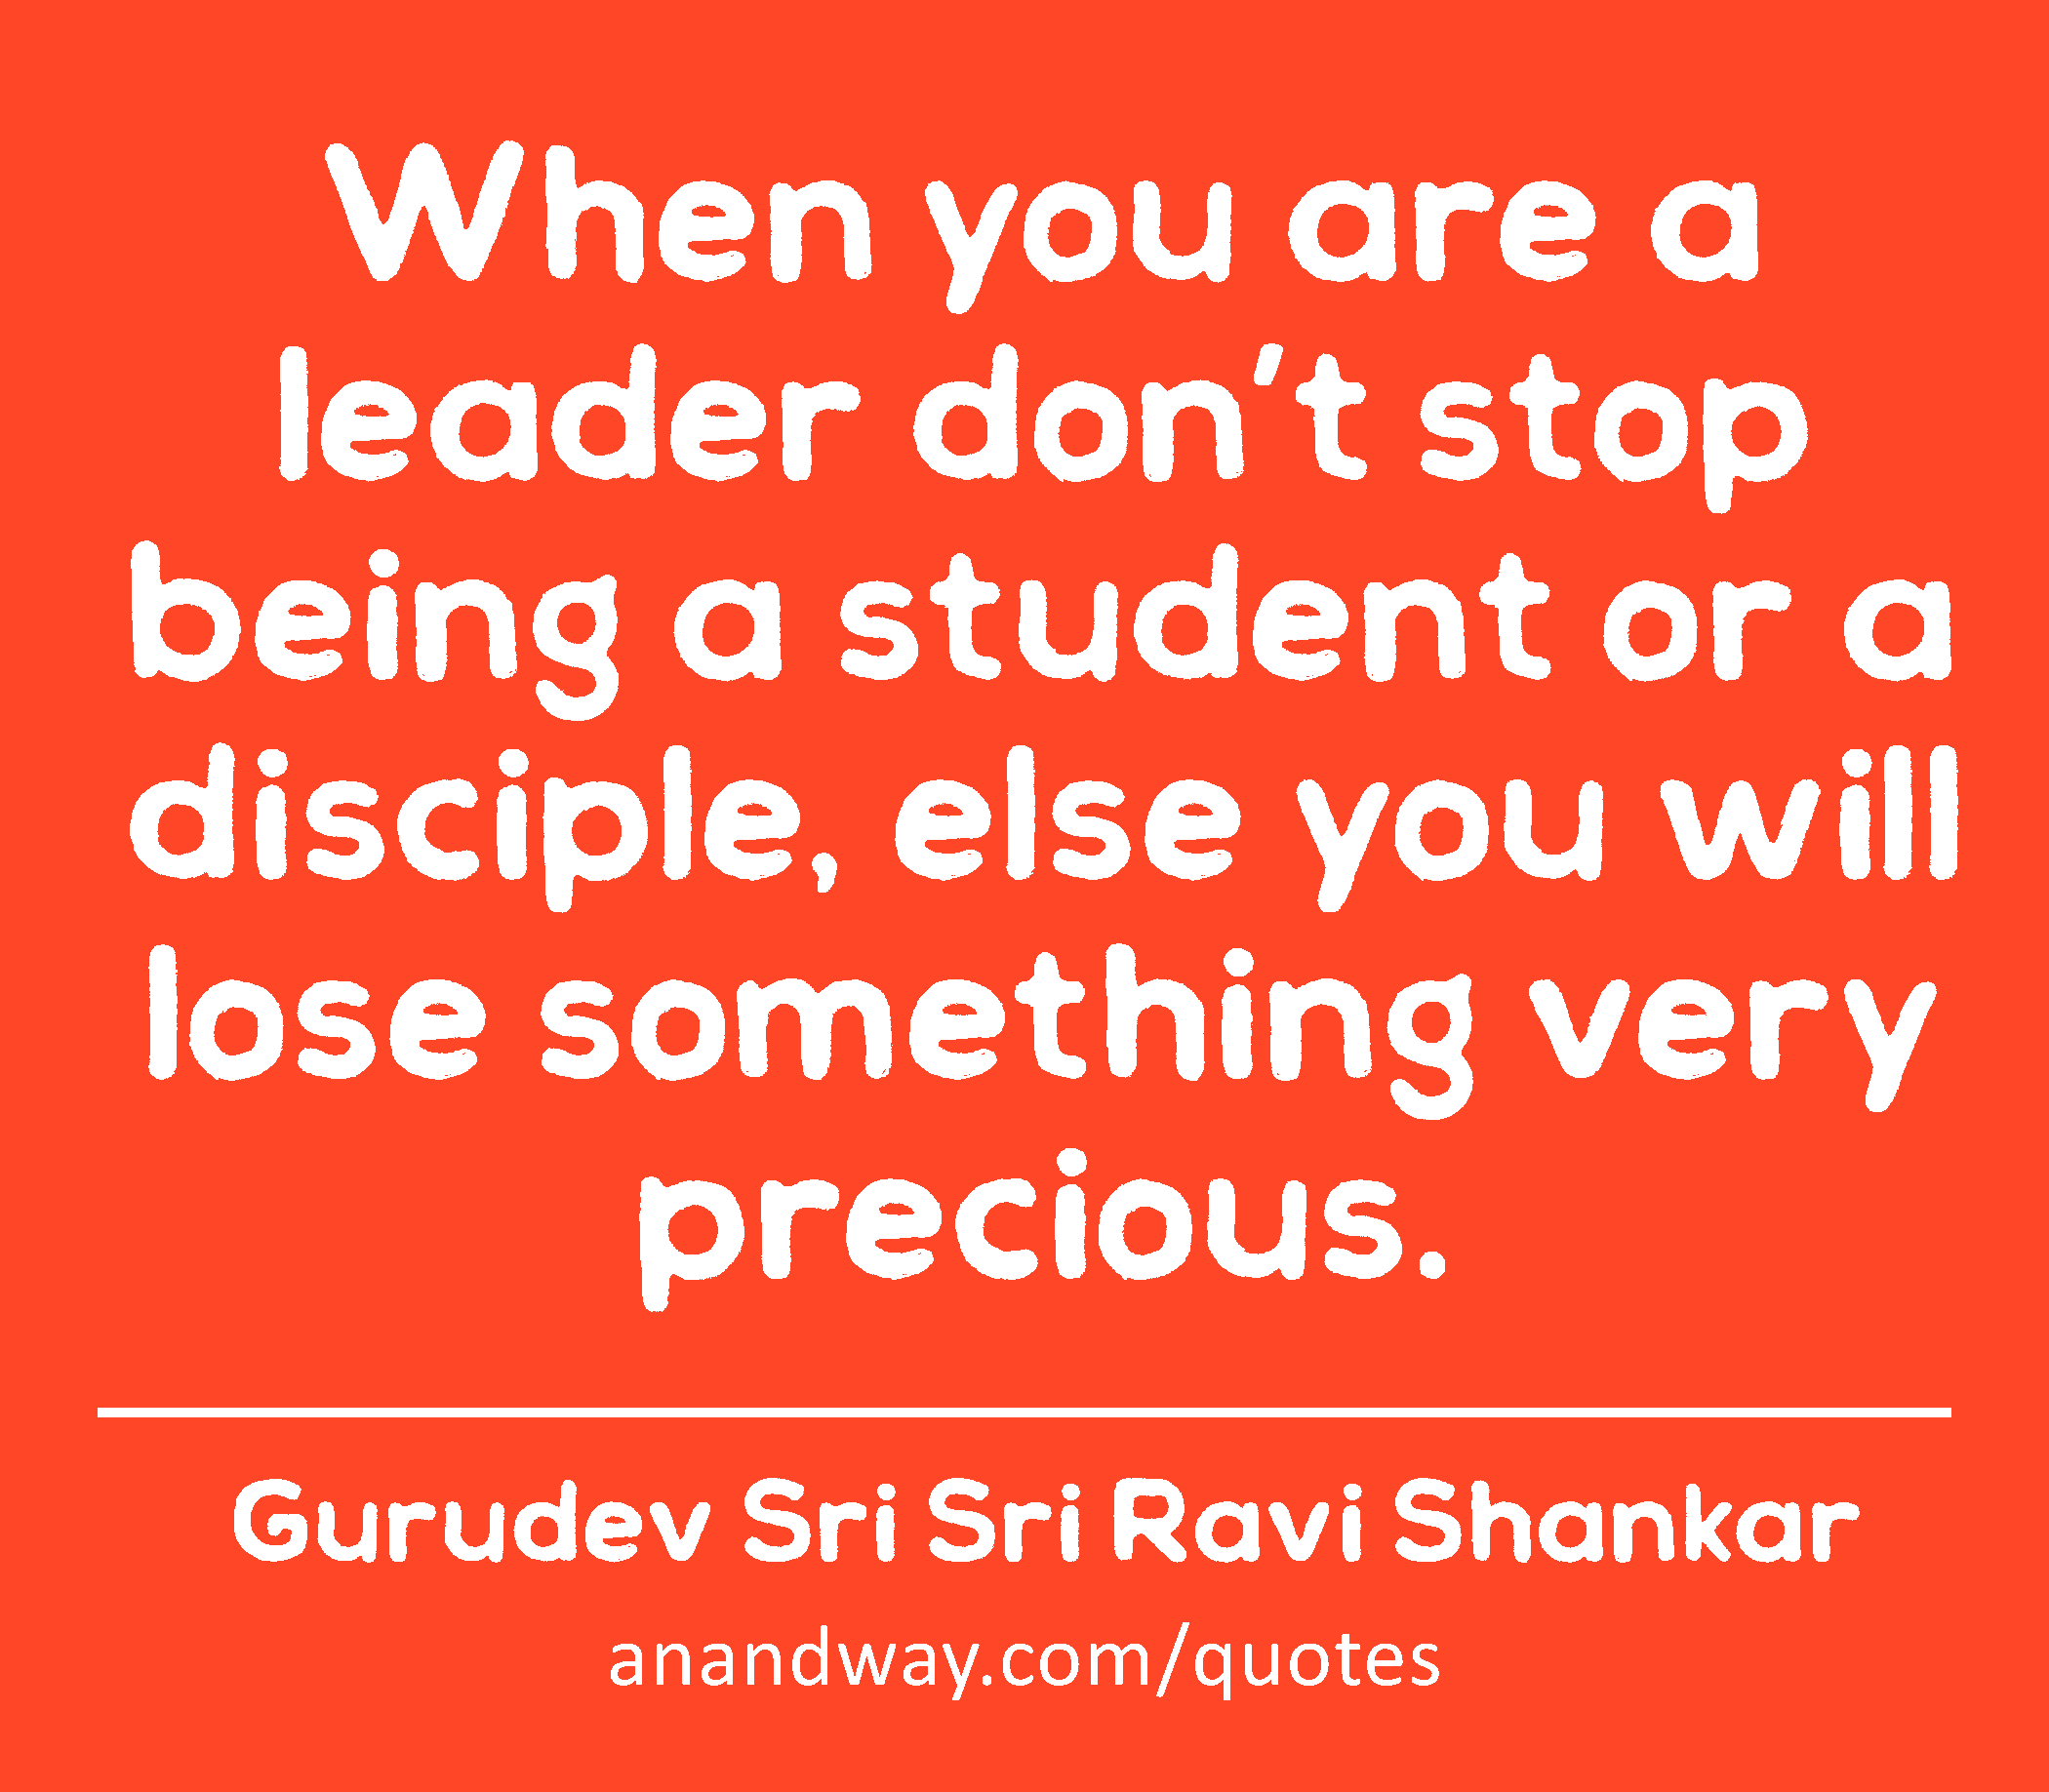 When you are a leader don’t stop being a student or a disciple, else you will lose something very
 -Gurudev Sri Sri Ravi Shankar